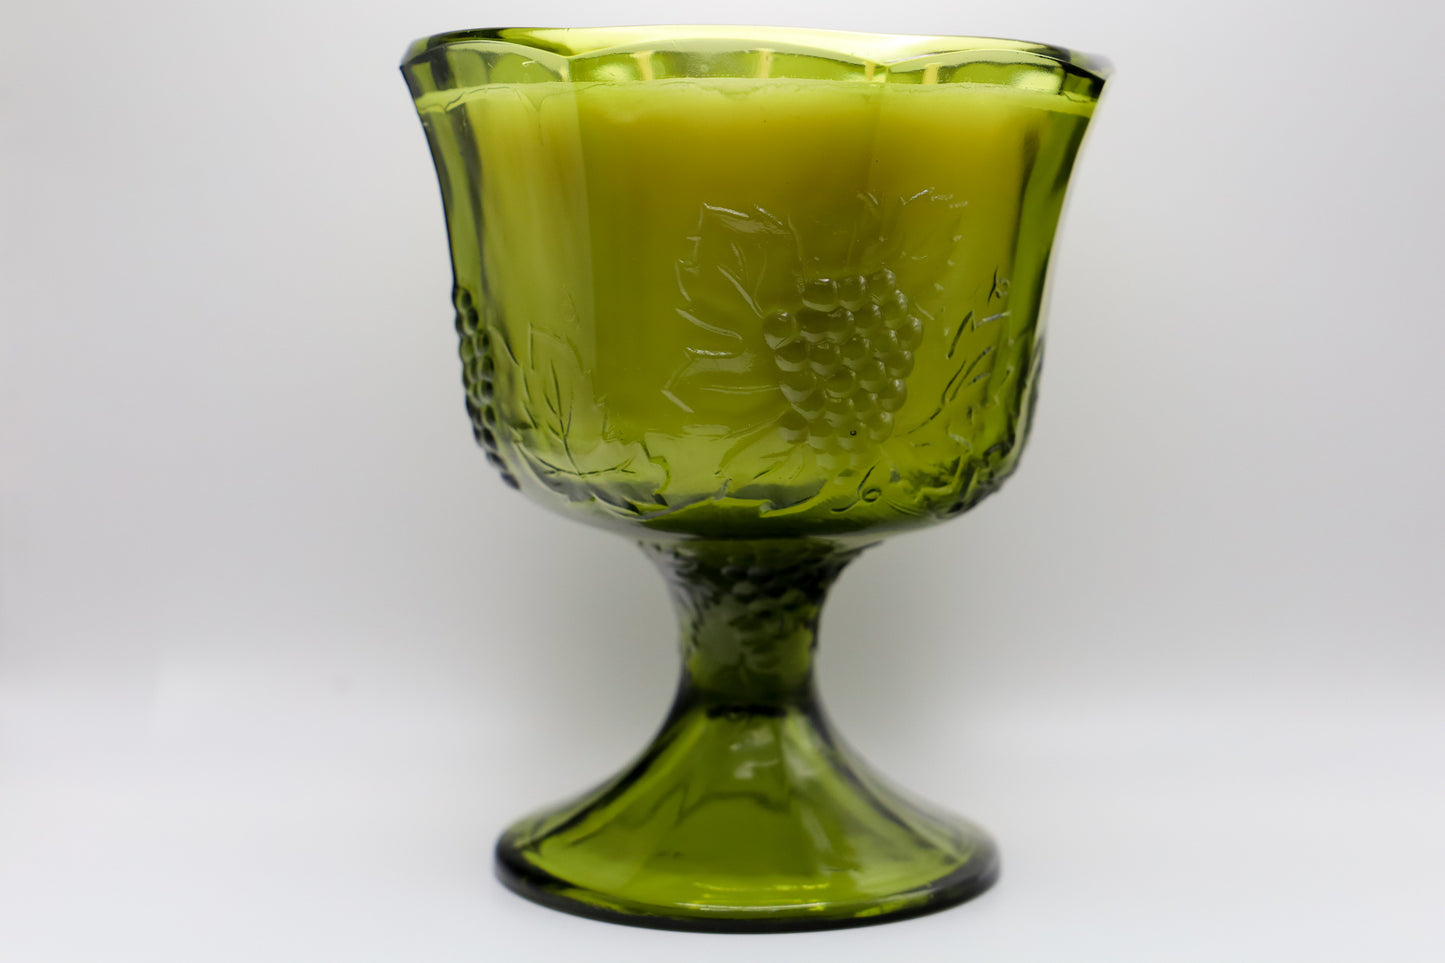 Large green glass compote in grape vine motif with white currant scented 3 wick soy candle